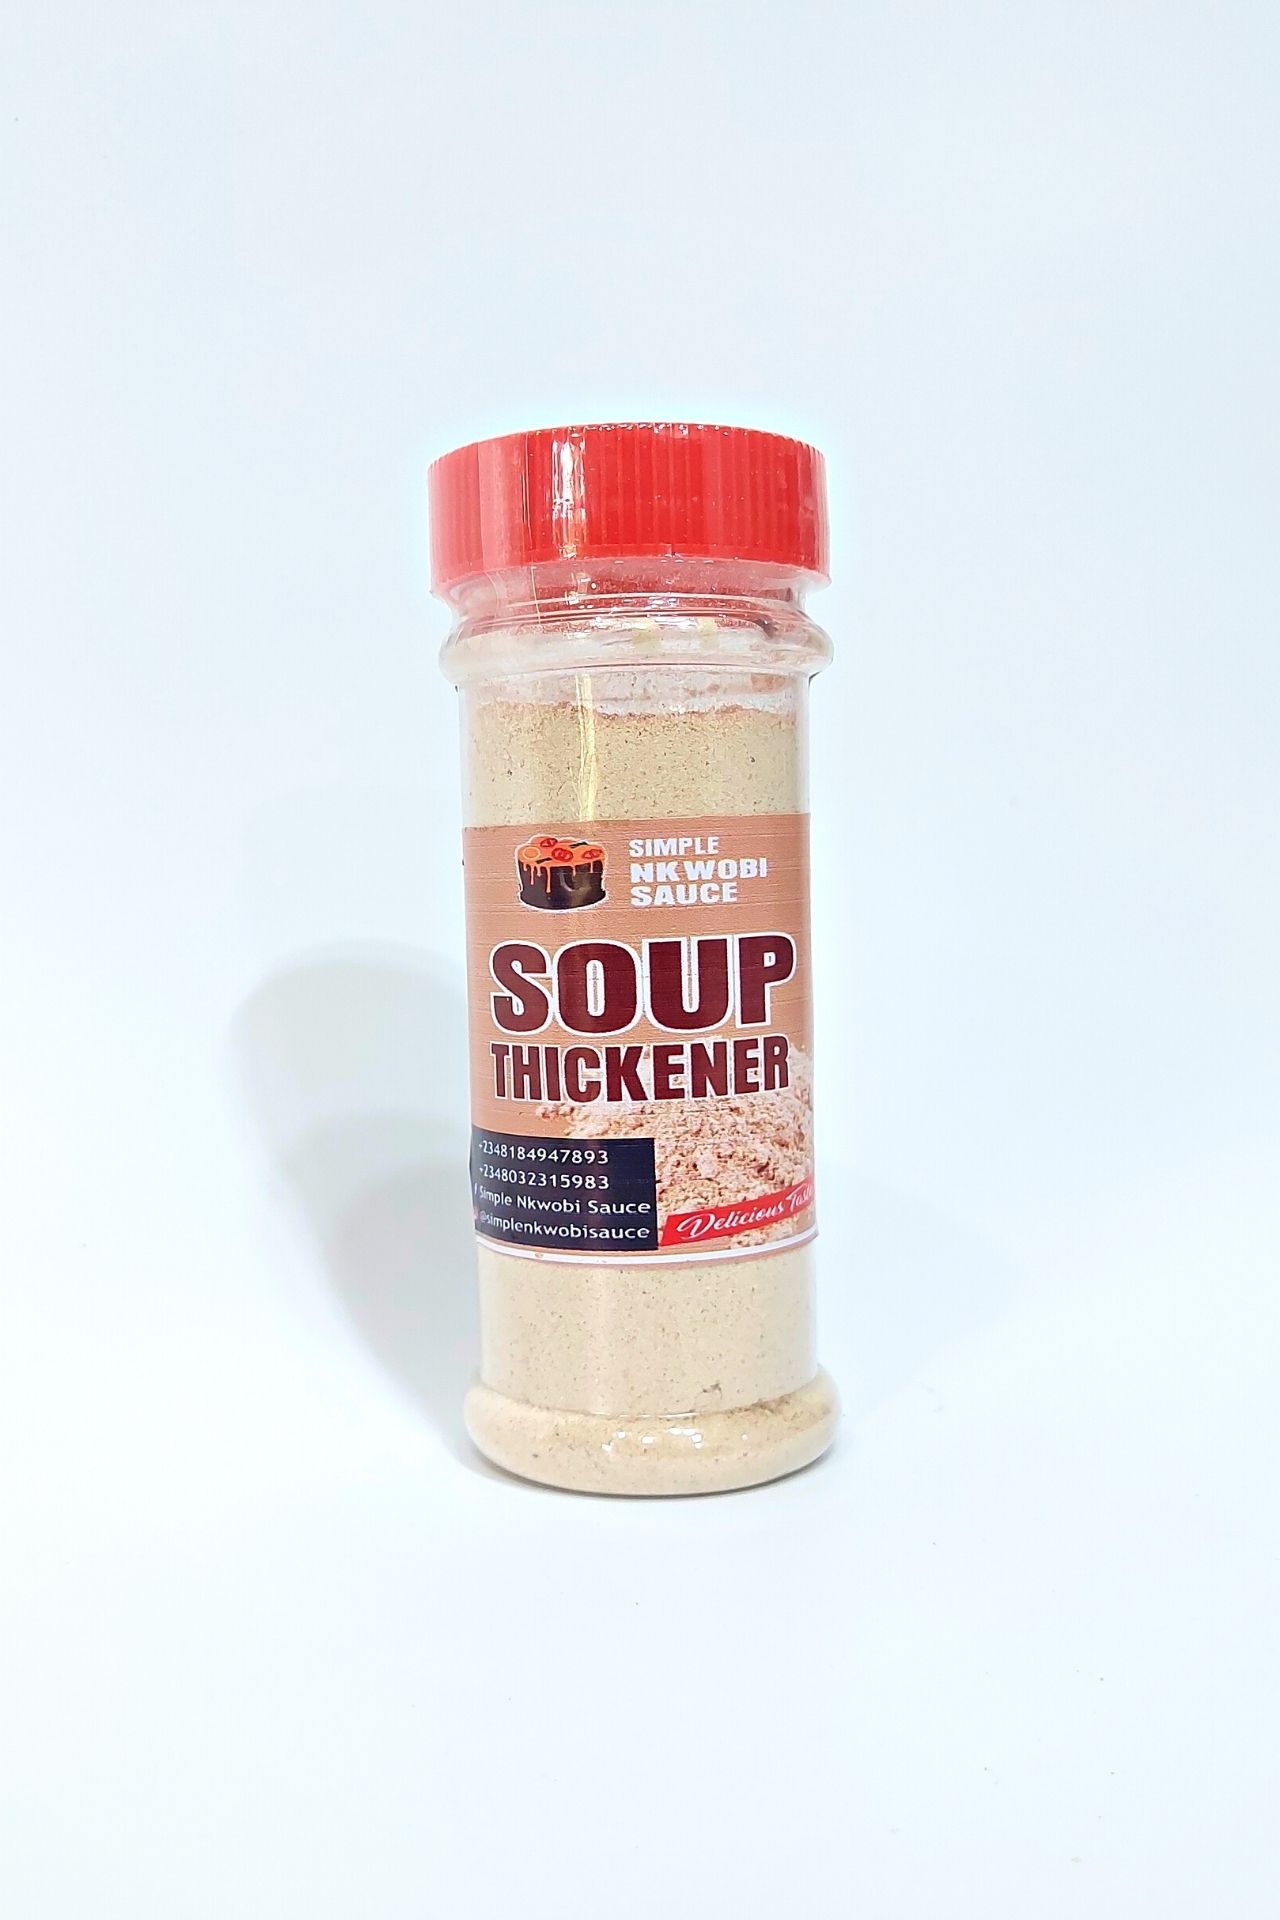 Soup Thickener